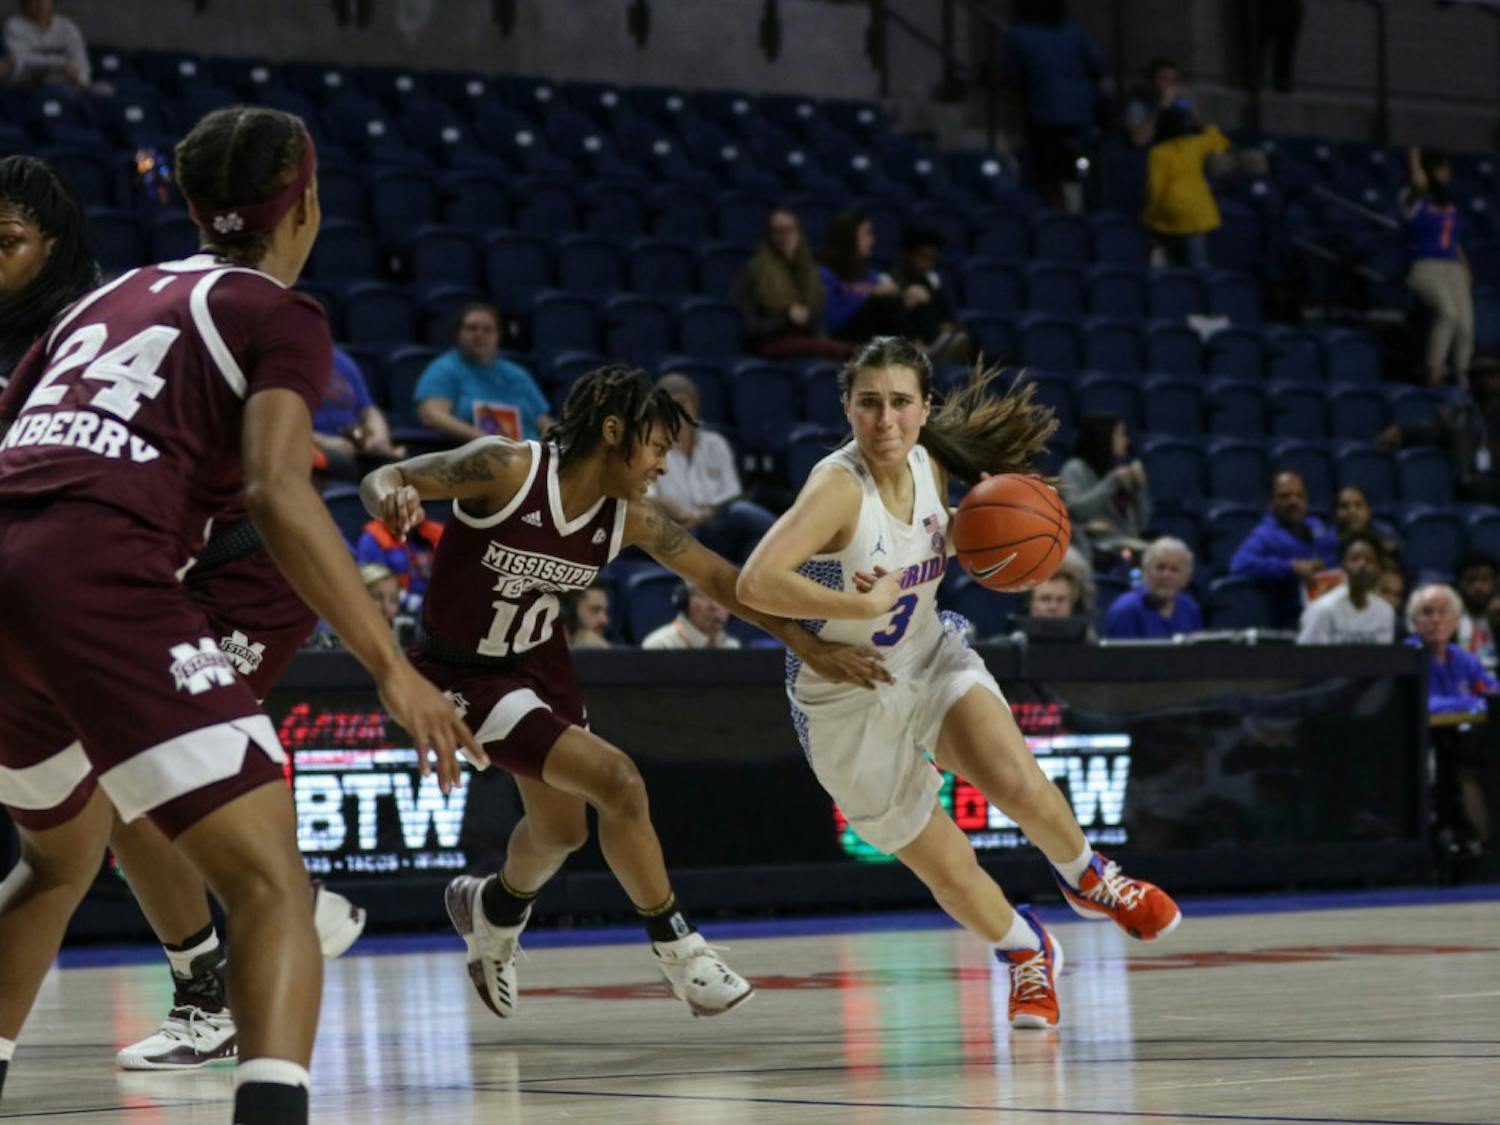 UF guard Funda Nakkasoglu scored 14 points in Florida’s 90-42 loss to Mississippi State on Thursday night. She was the only Gator to score in the first quarter.
&nbsp;